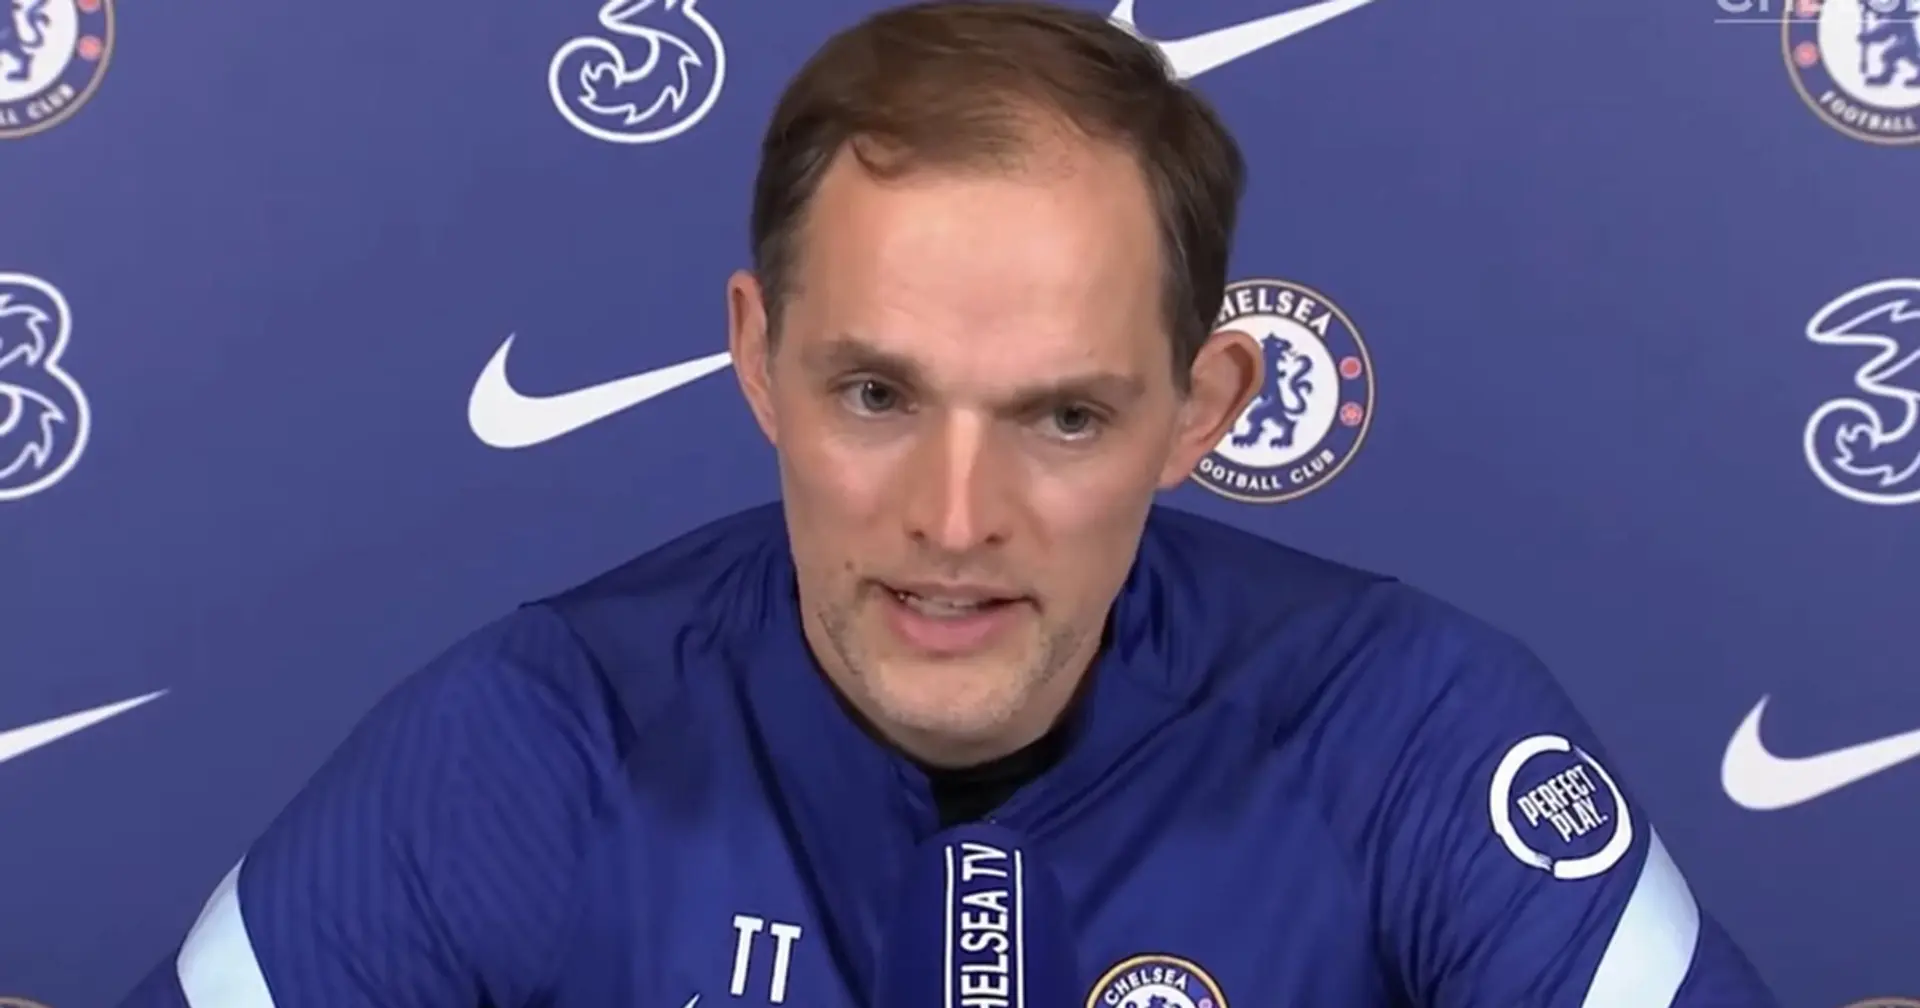 Thomas Tuchel vows to do his best to help Chelsea's struggling strikers find their best form